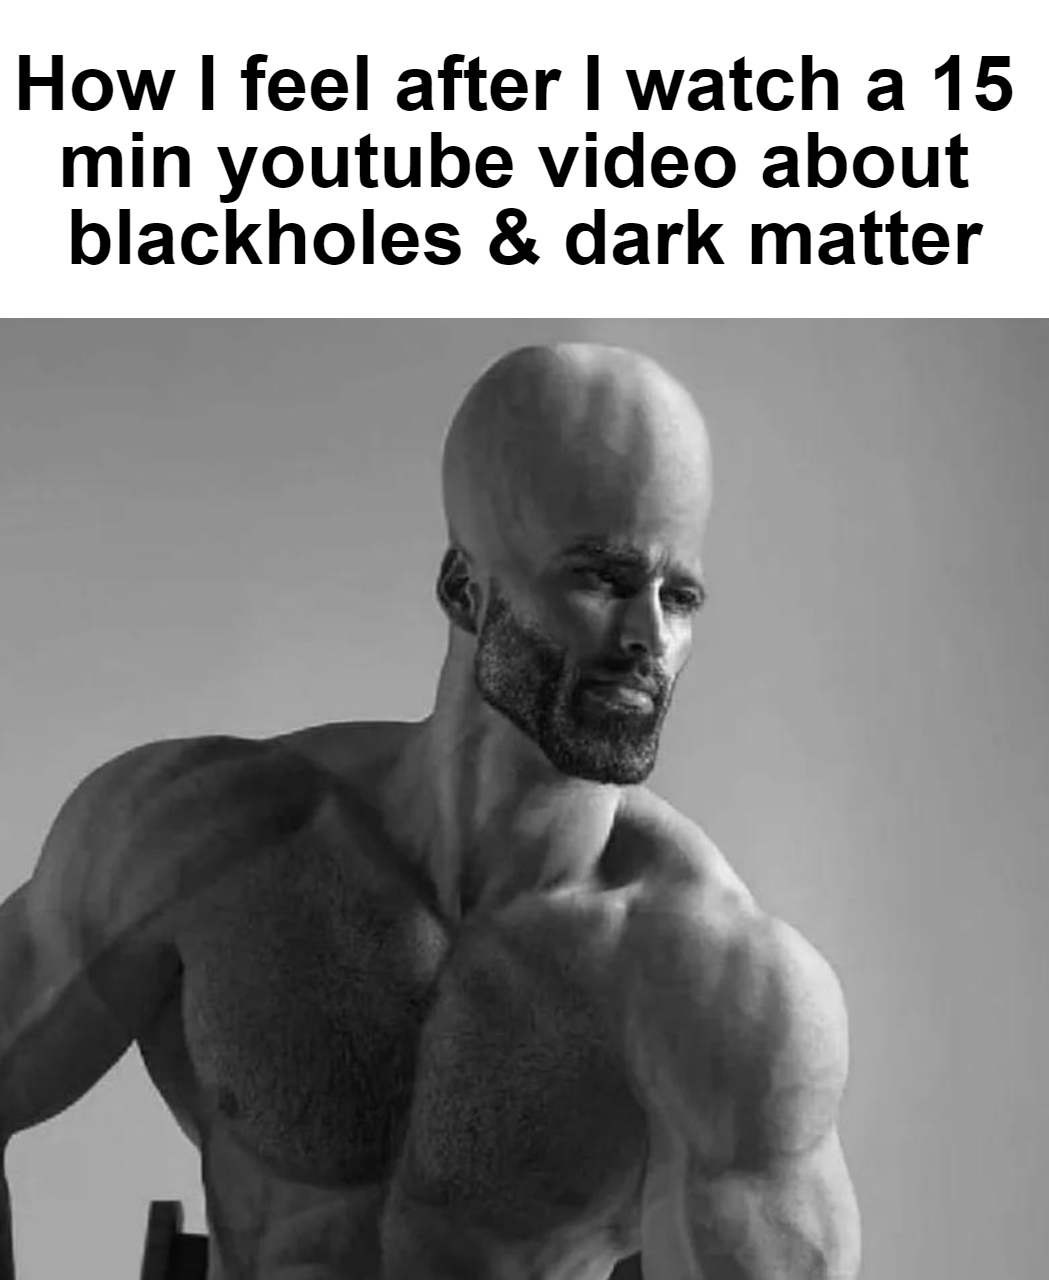 funny gaming memes - buff chad meme - How I feel after I watch a 15 min youtube video about blackholes & dark matter